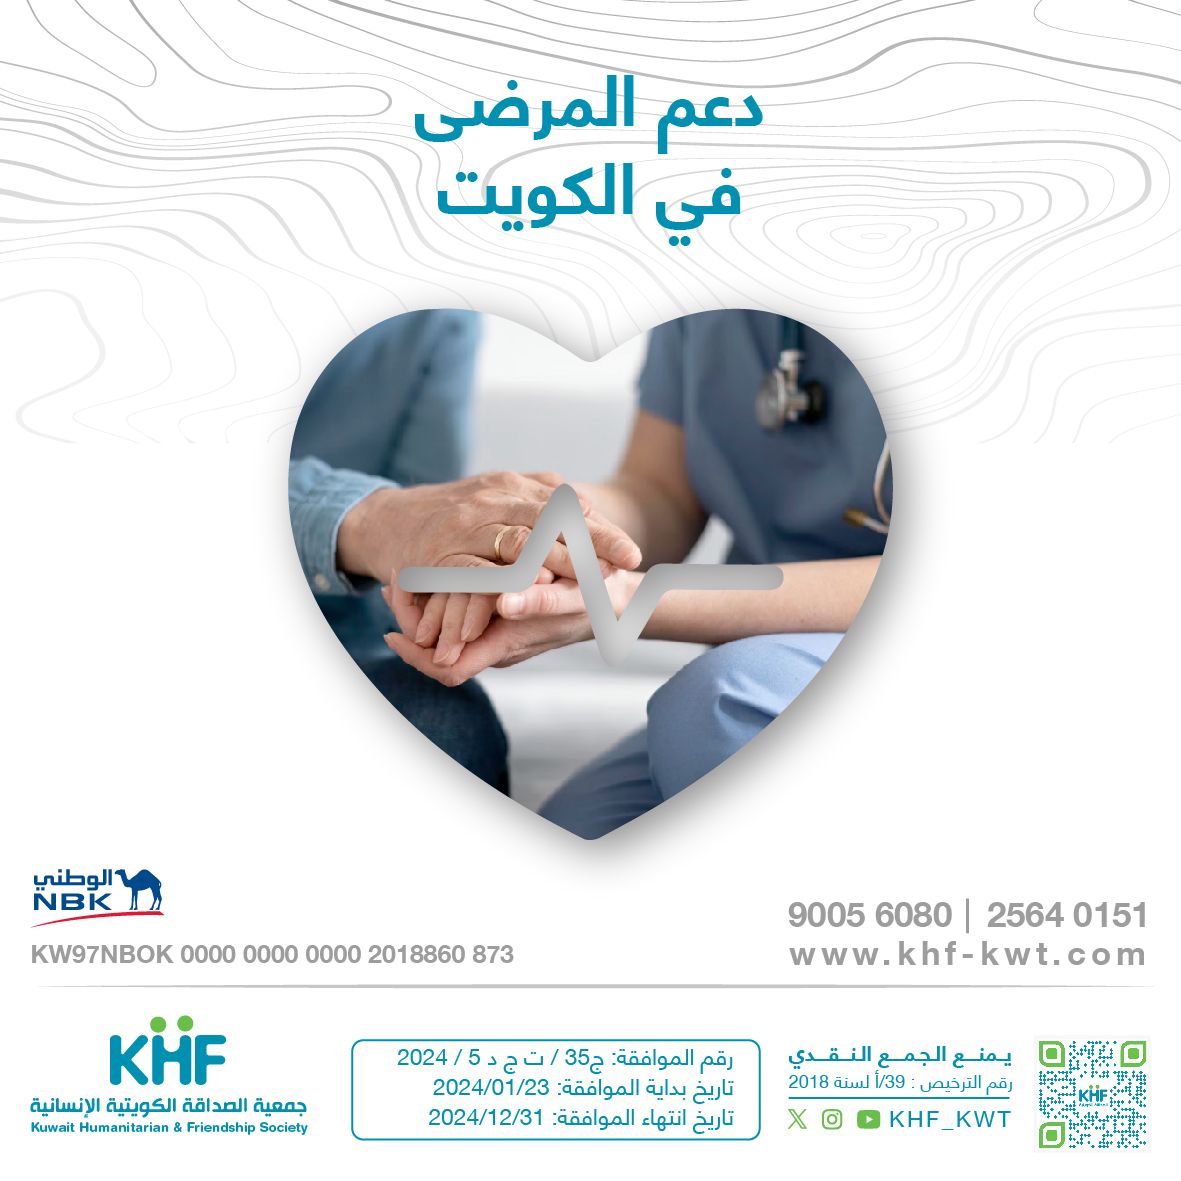 Supporting patients in Kuwait